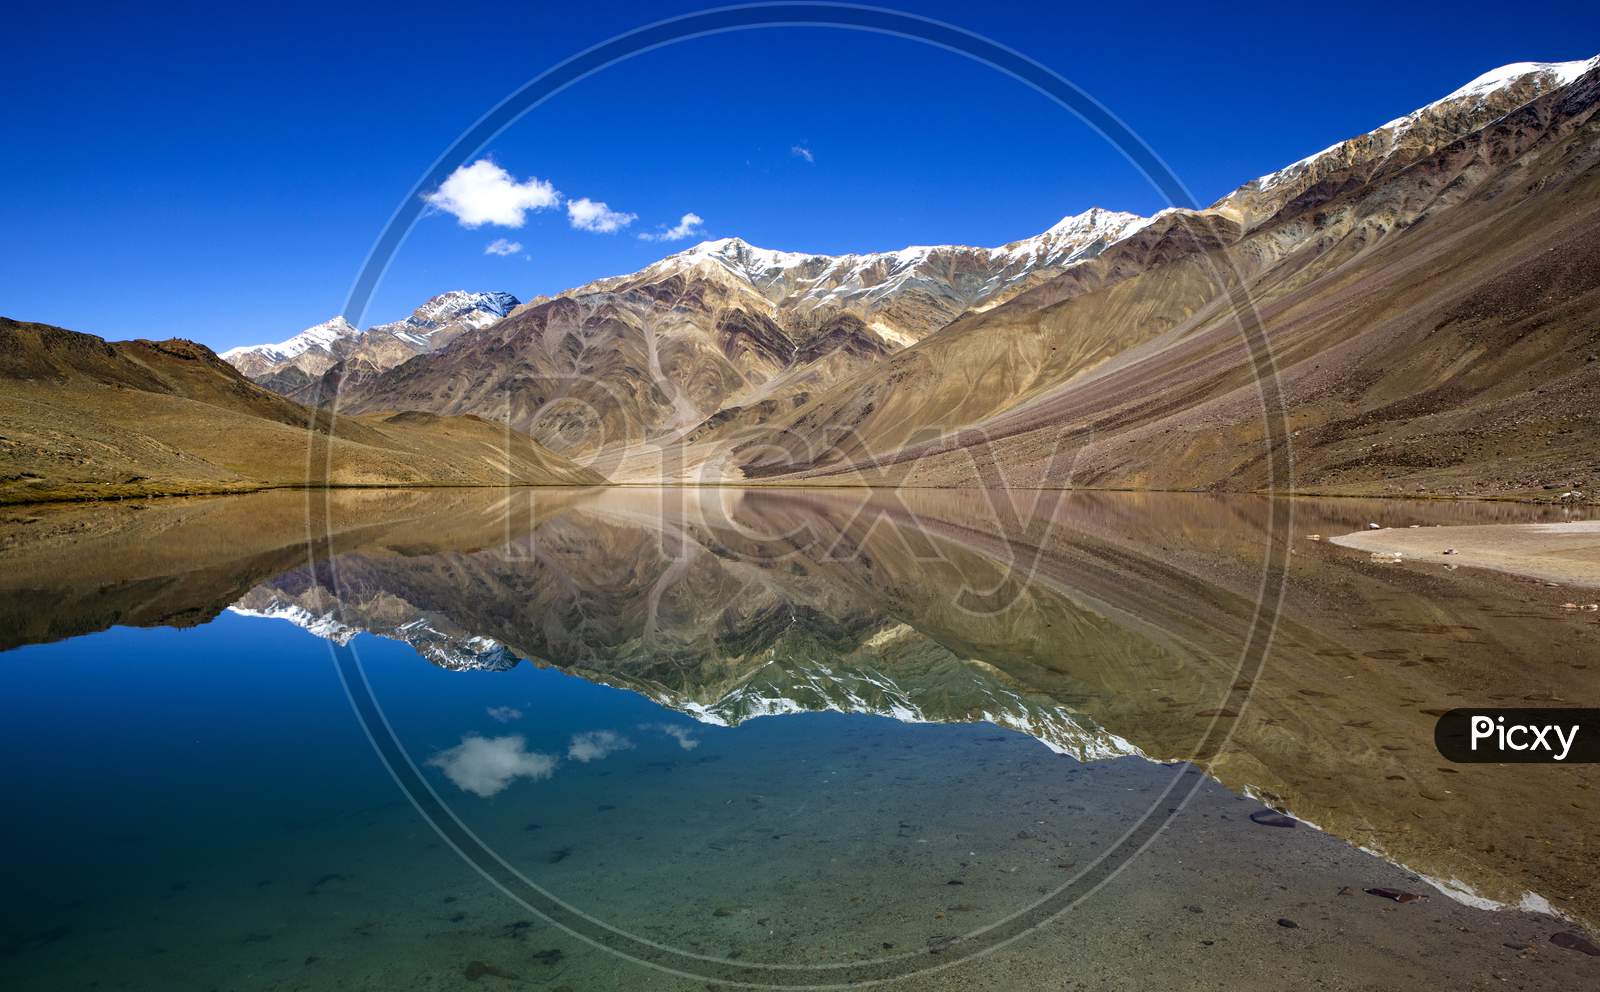 Reflection Of Mountains On Chandra Tal Lake At An Altitude Of 14000 Ft. on The Himalaya